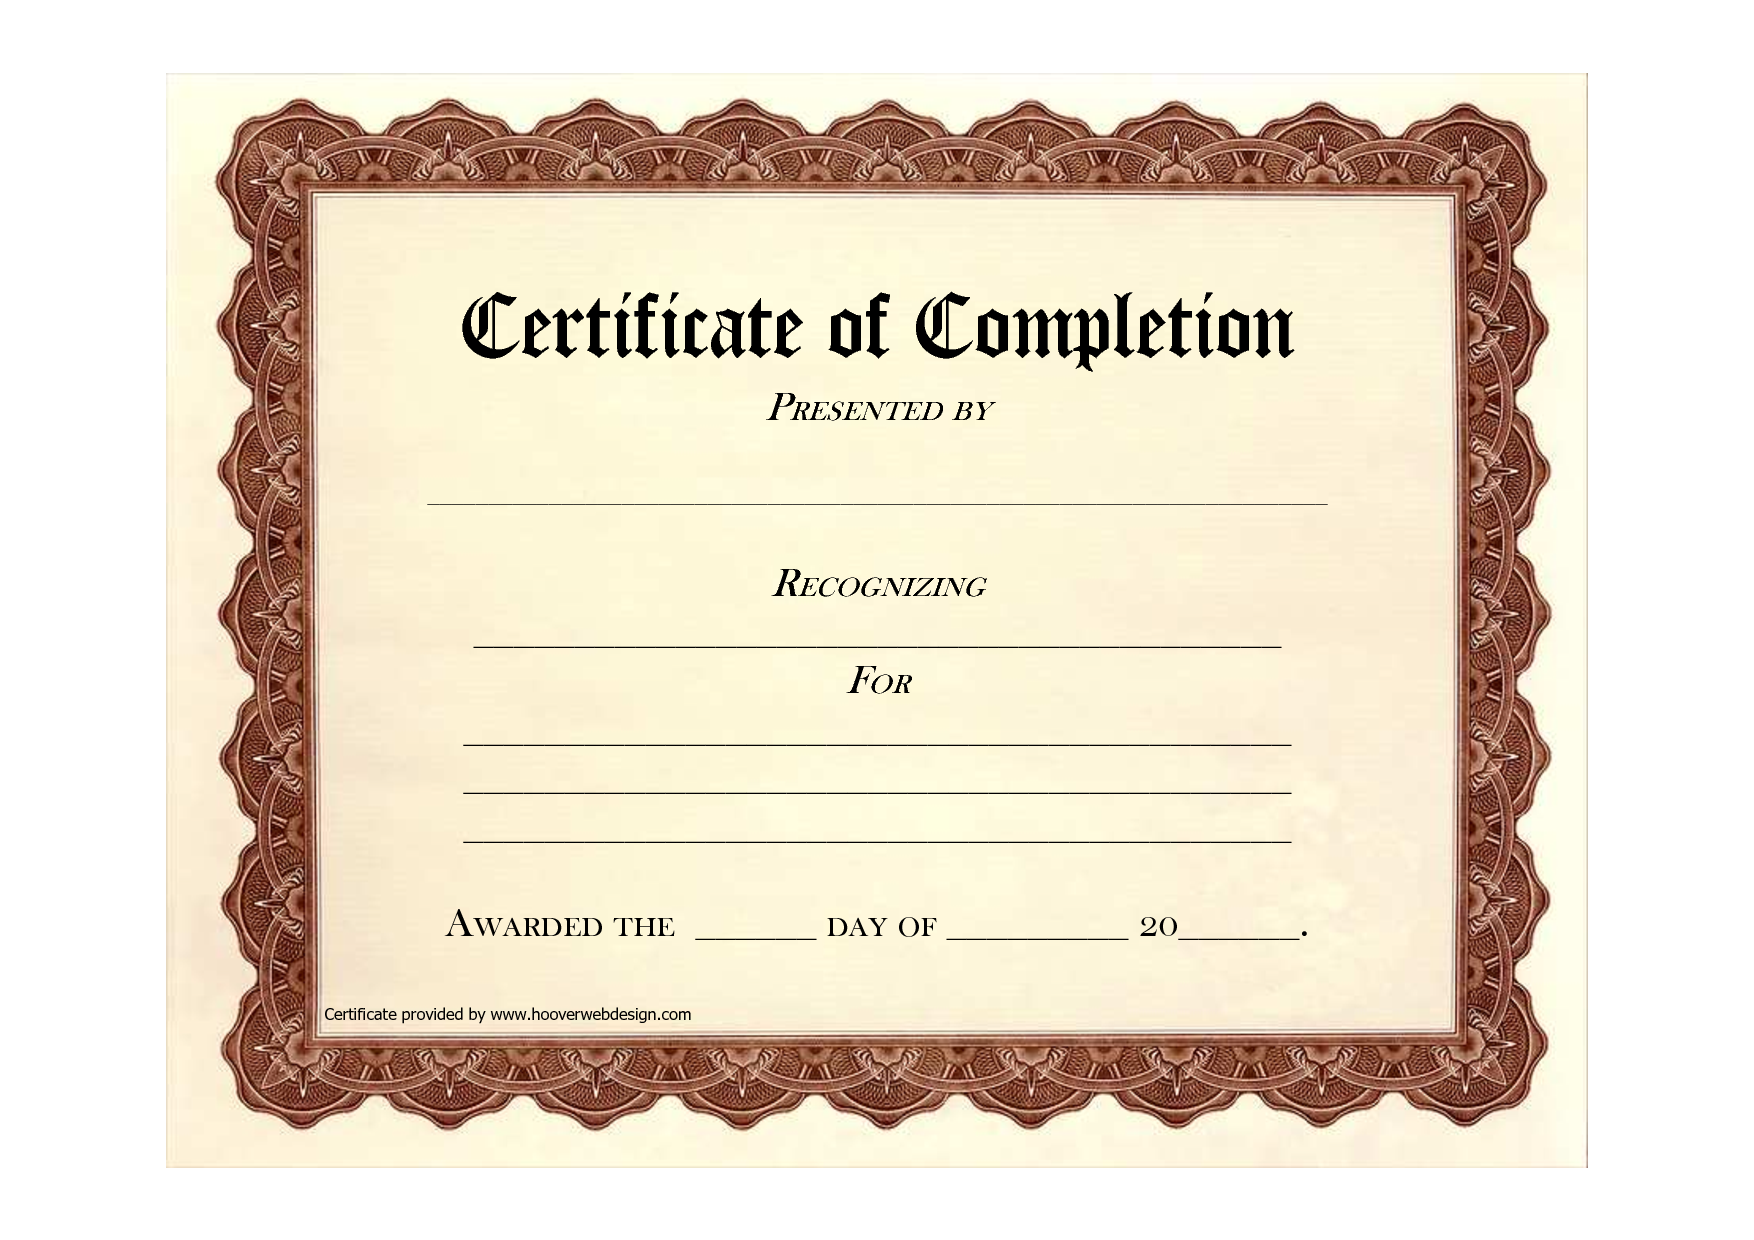 23 Certificate Of Completion Templates Free Download Images - Free Within Certificate Templates For Word Free Downloads